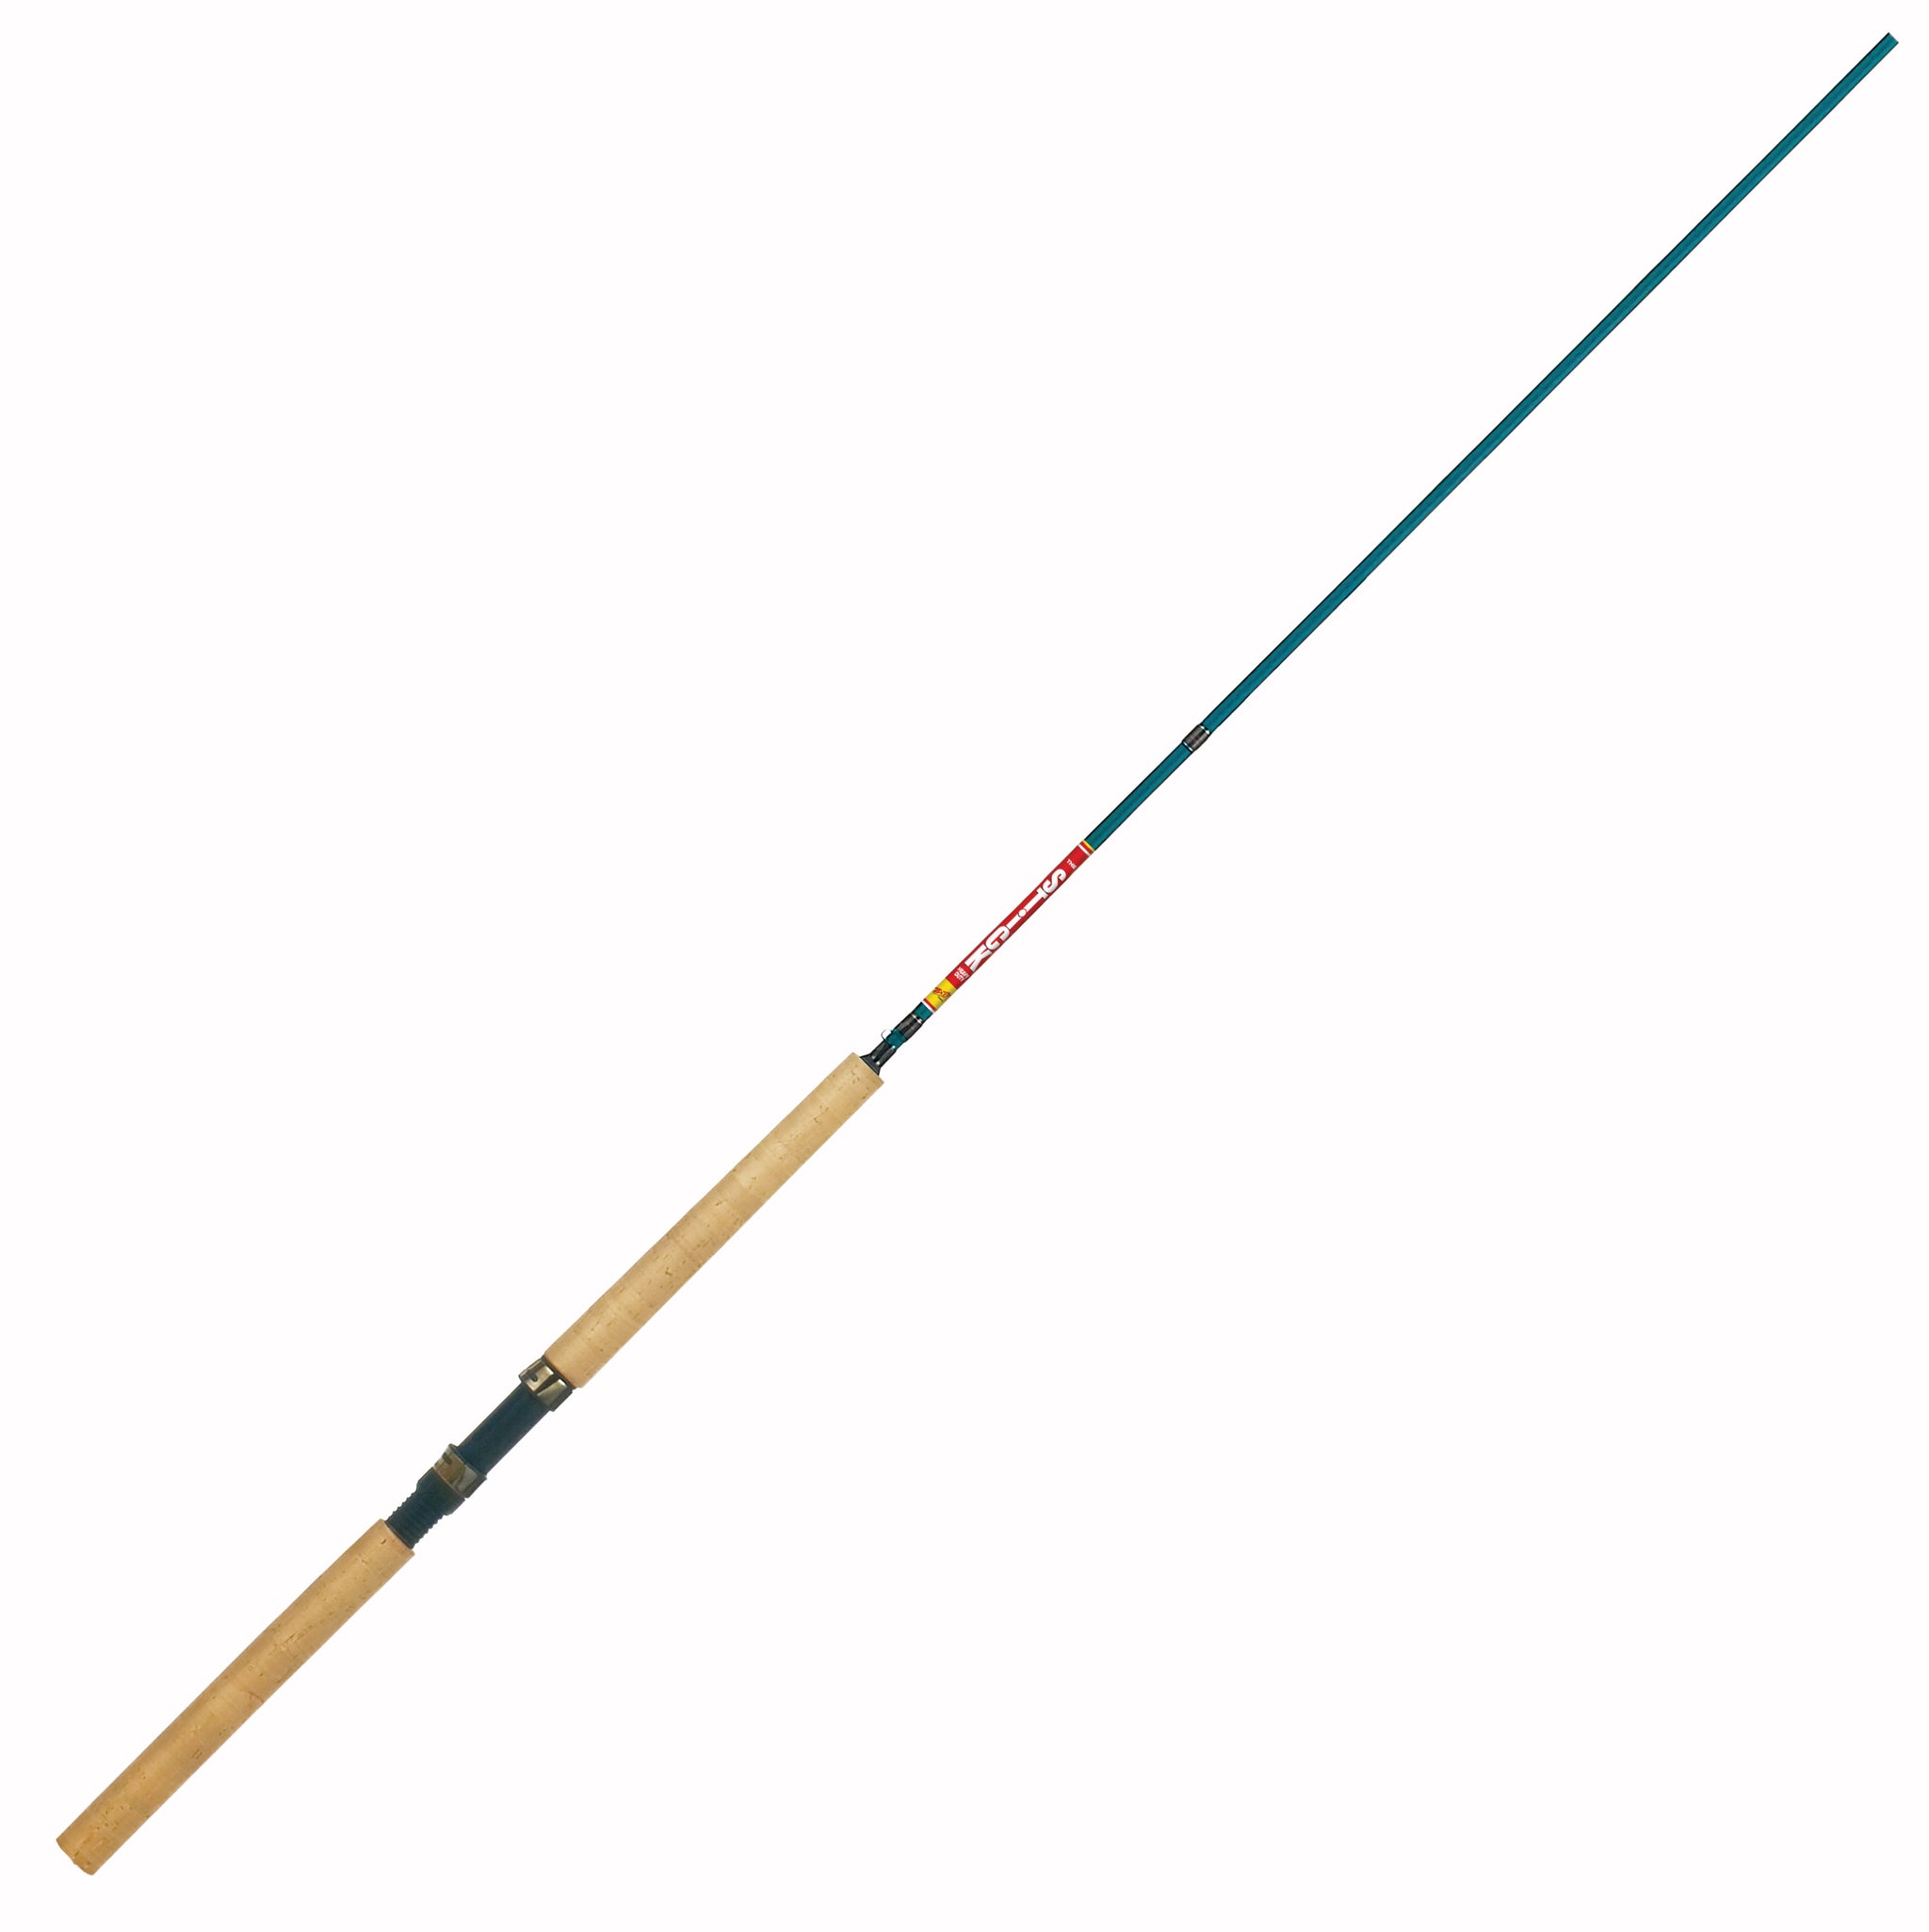 BnM The Stick 13 ft 2 pc Heavy Action Jig fishing Pole $110